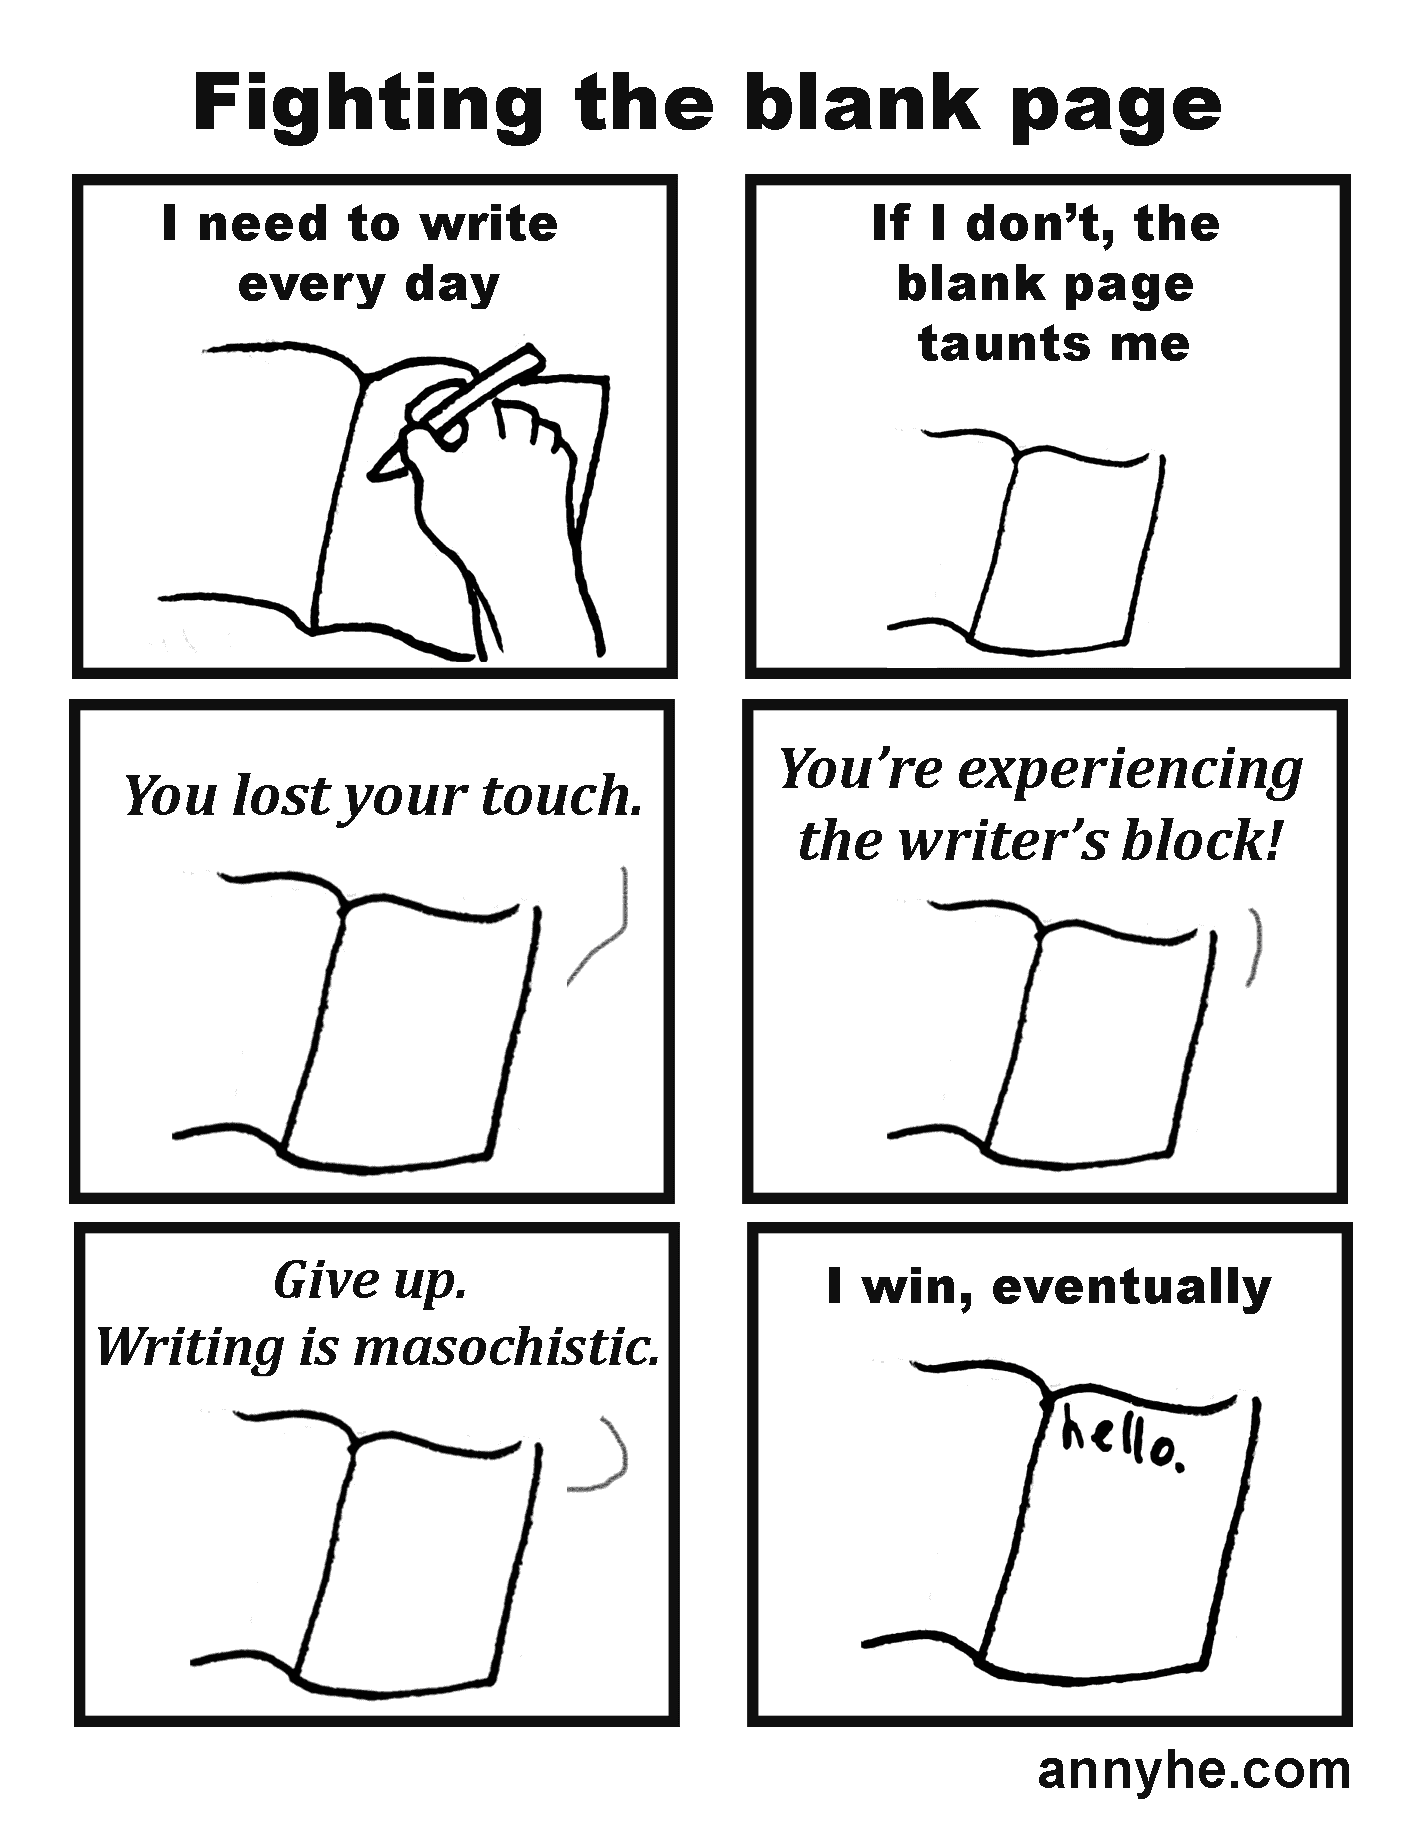 Fighting the blank page